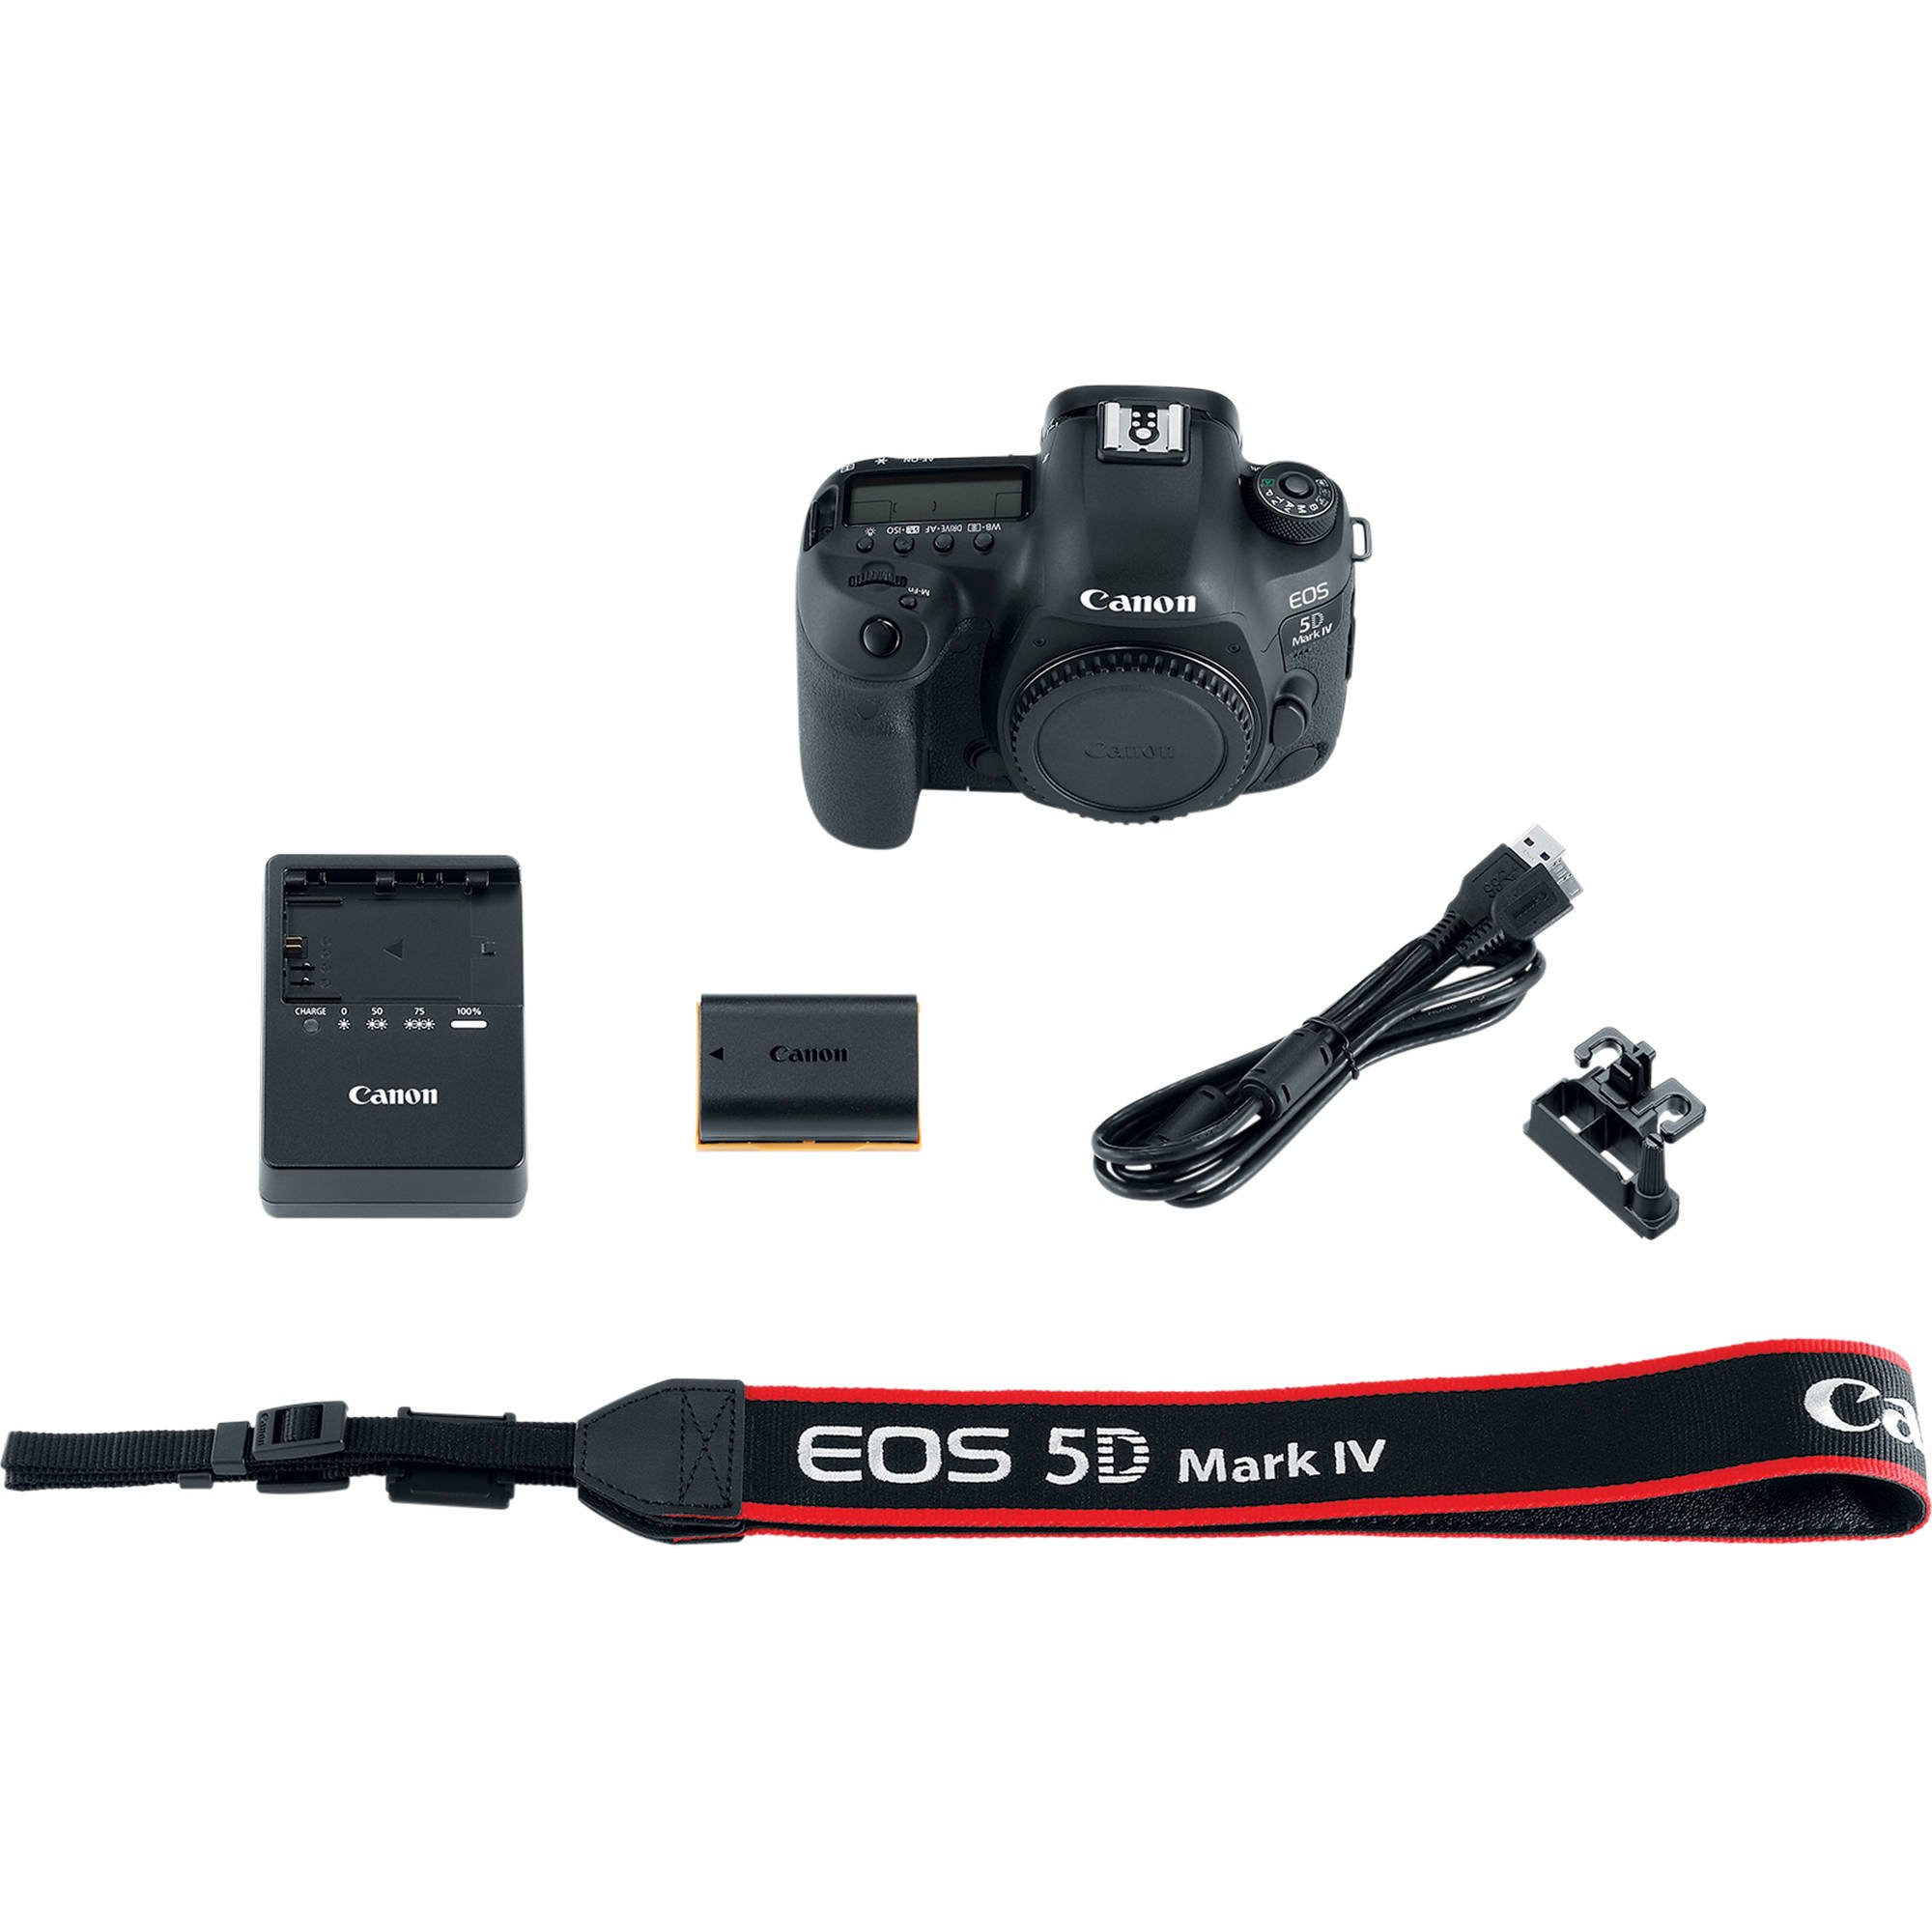 Canon EOS 5D Mark IV DSLR Camera International Version (No Warranty)(Body Only) + Professional Cleaning Kit - image 4 of 5